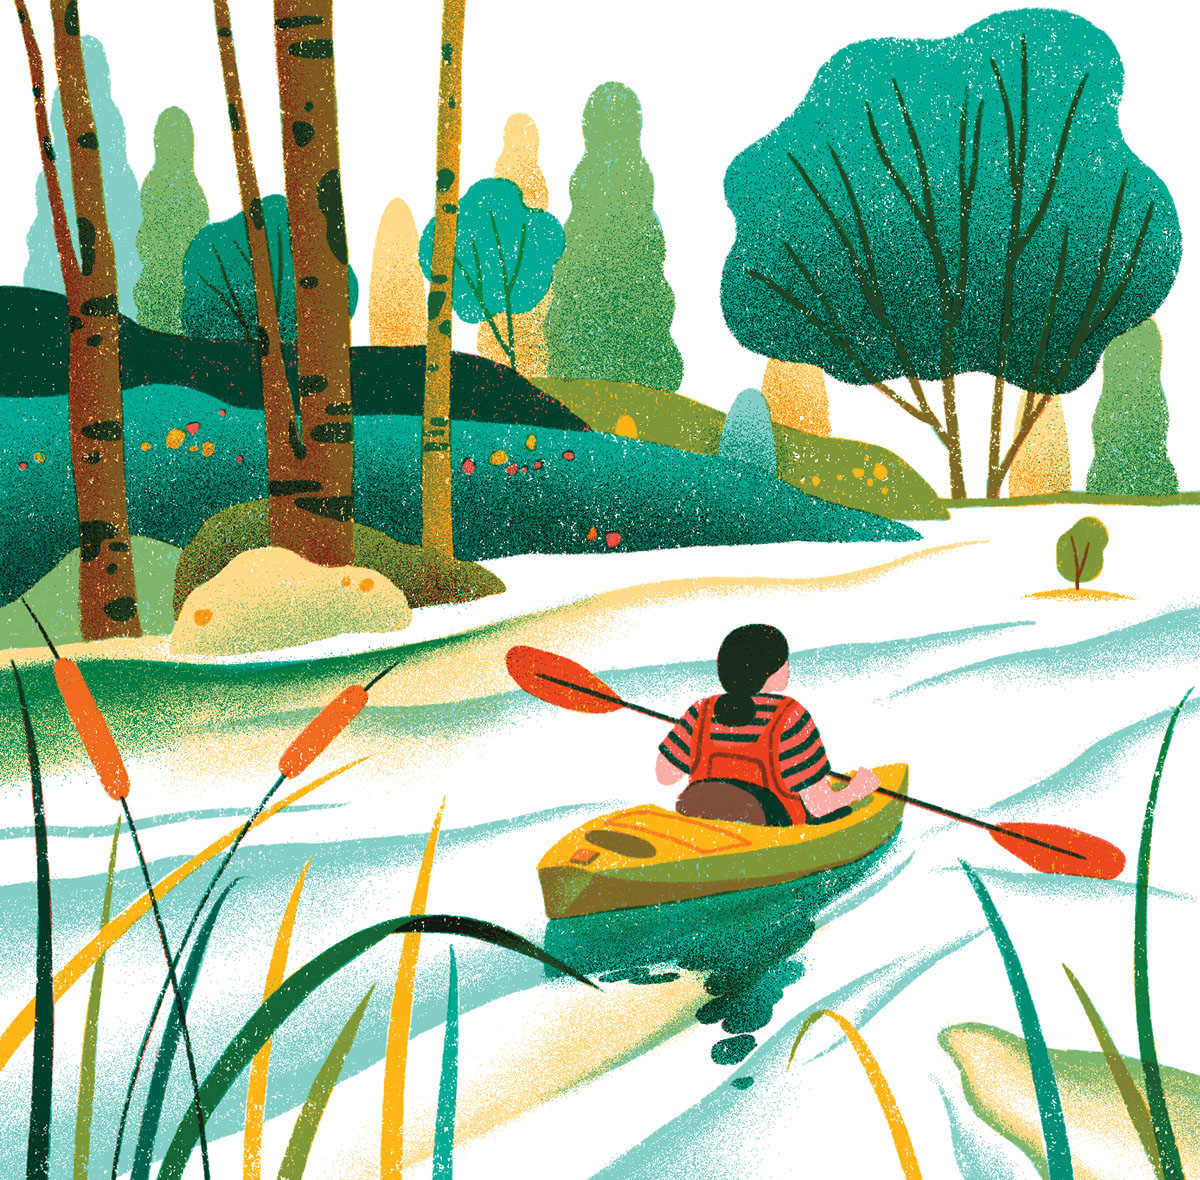 An illustration of a woman in a red life jacket paddling a kayak